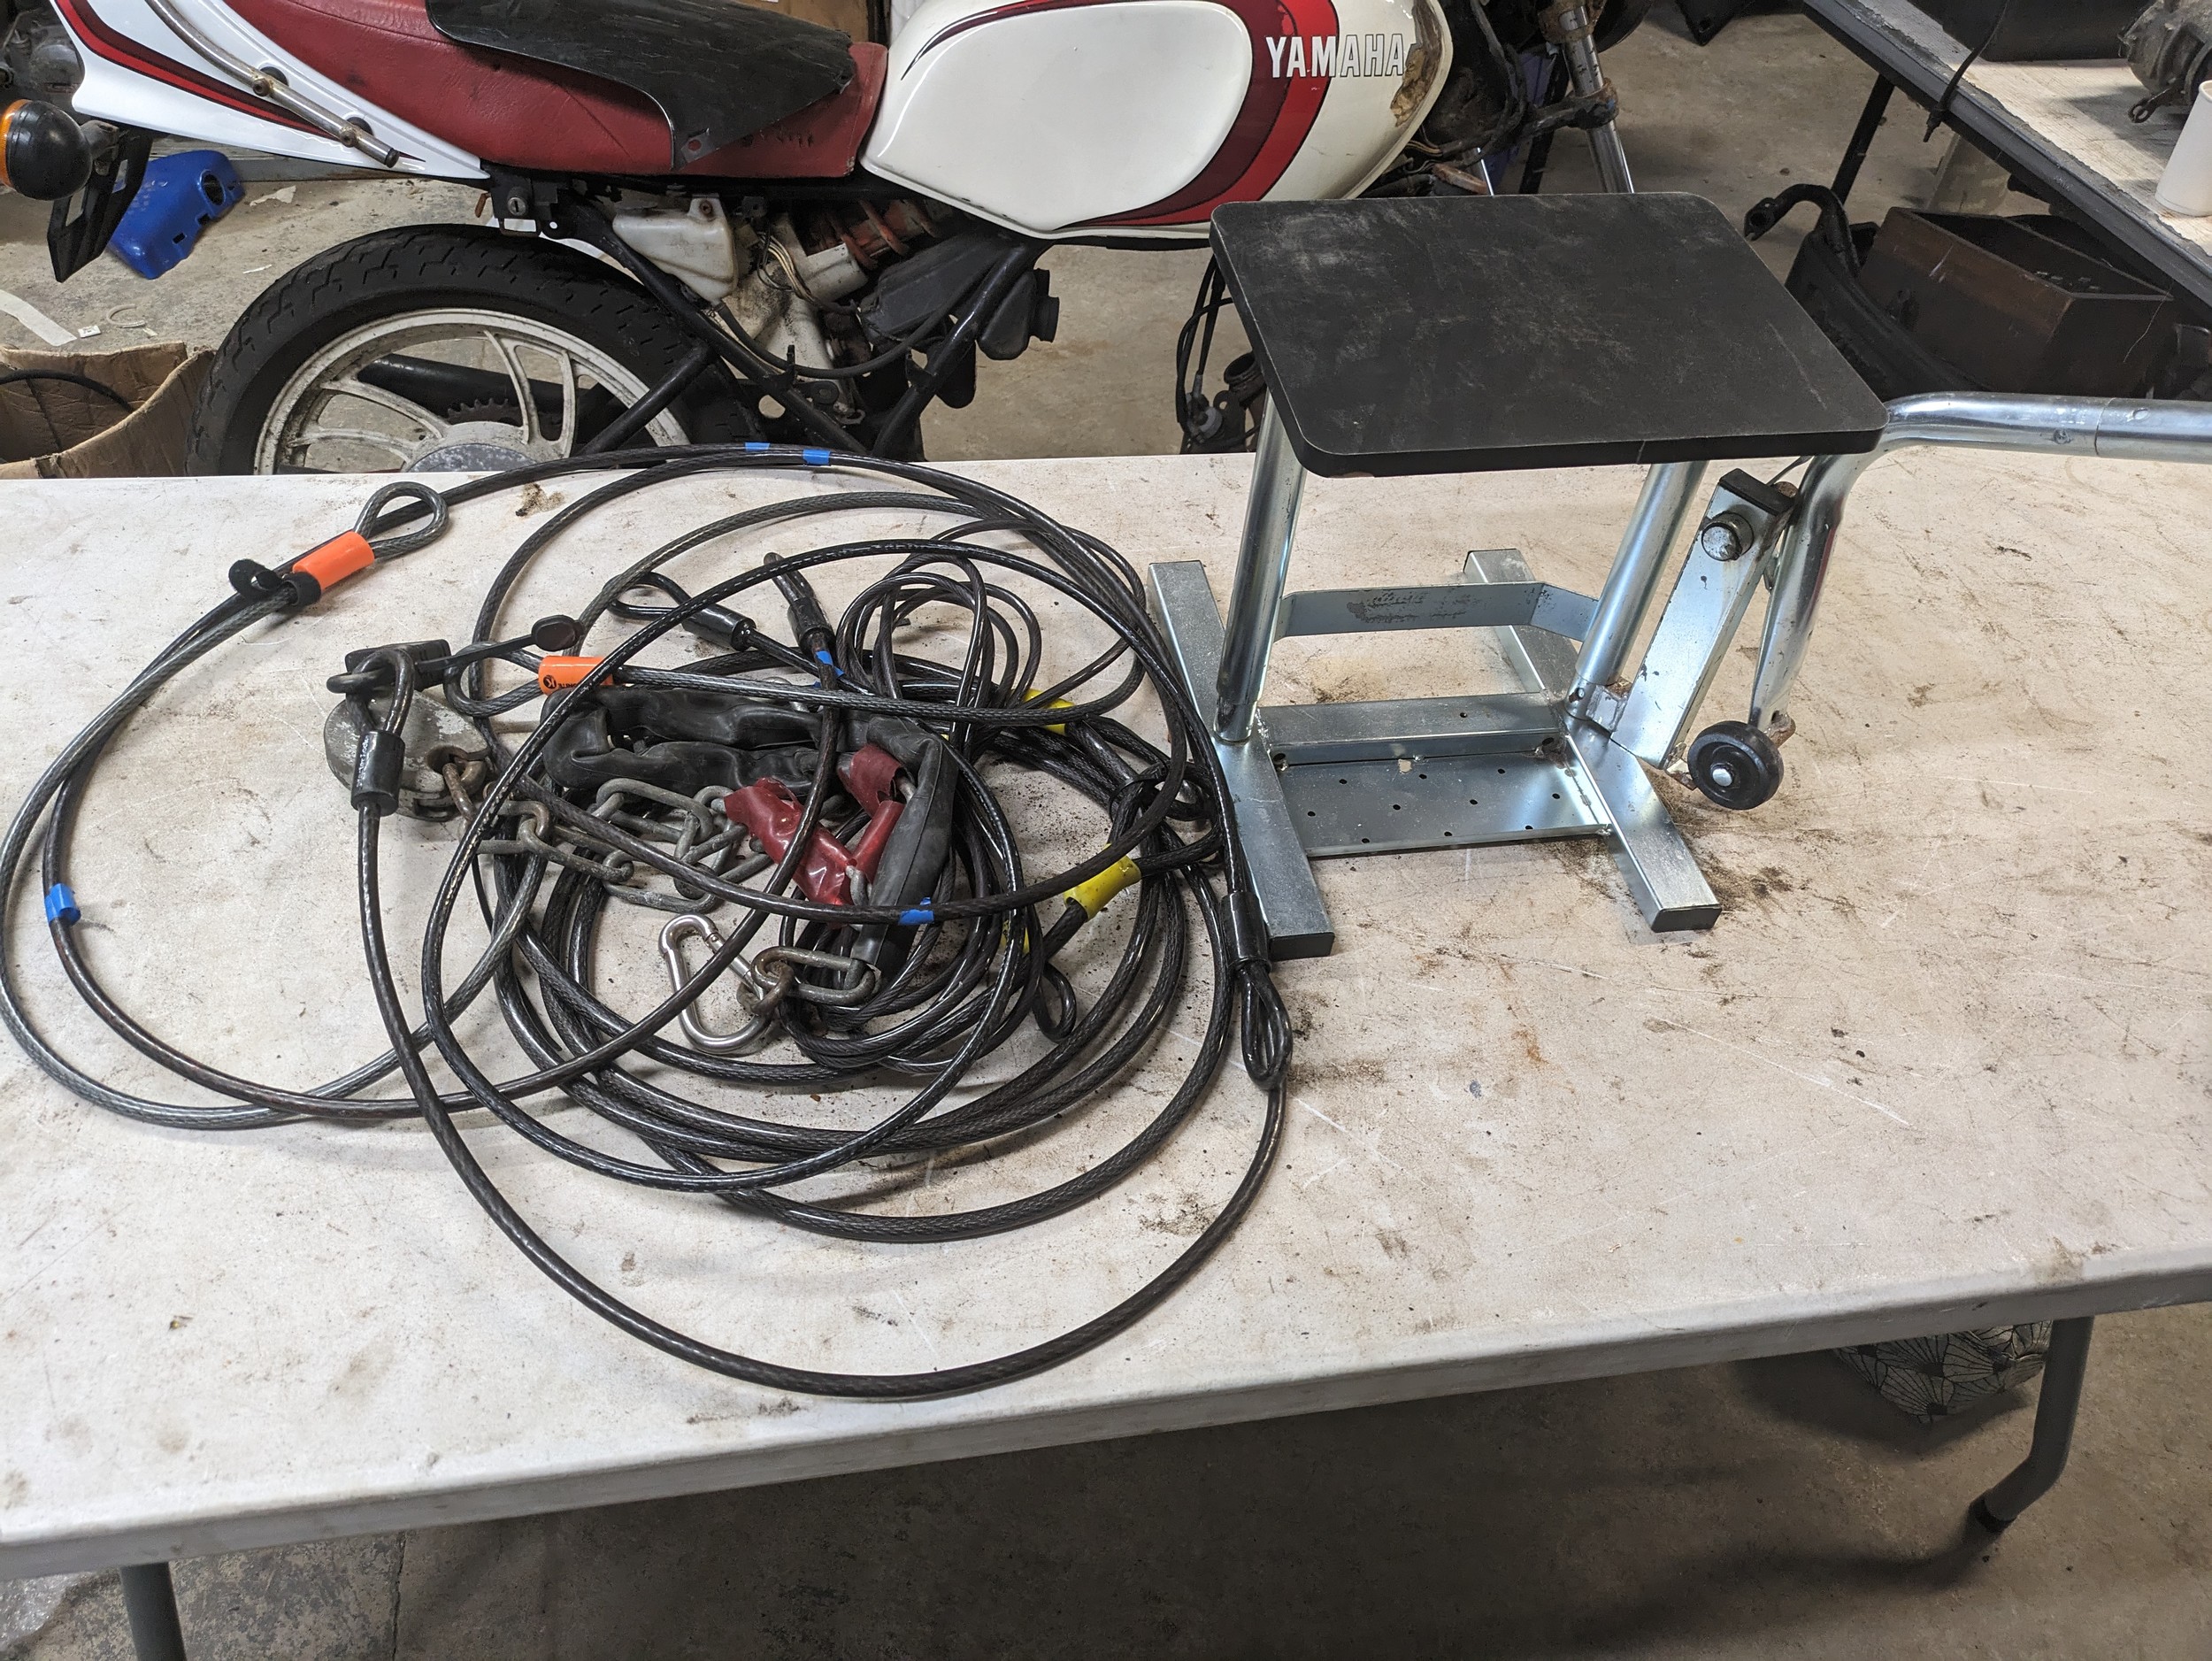 Motorbike stand with cables